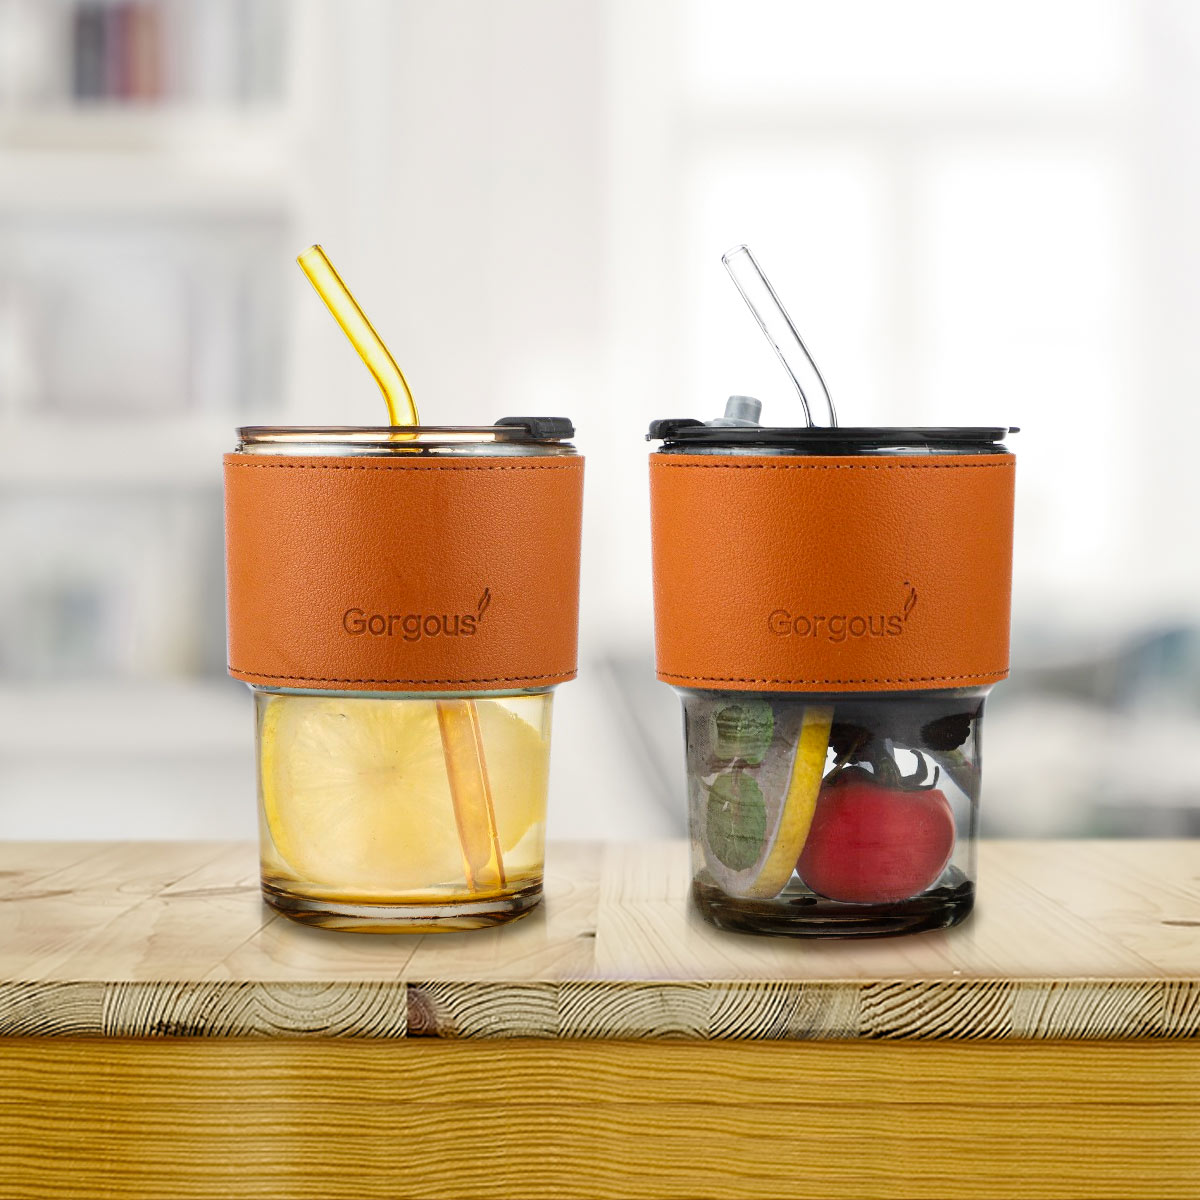 https://www.dtcworld.com.my/storage/product-images/3630/01.On-the-go-Glass-Cup-with-Leather-Holder_20220613161055.jpg